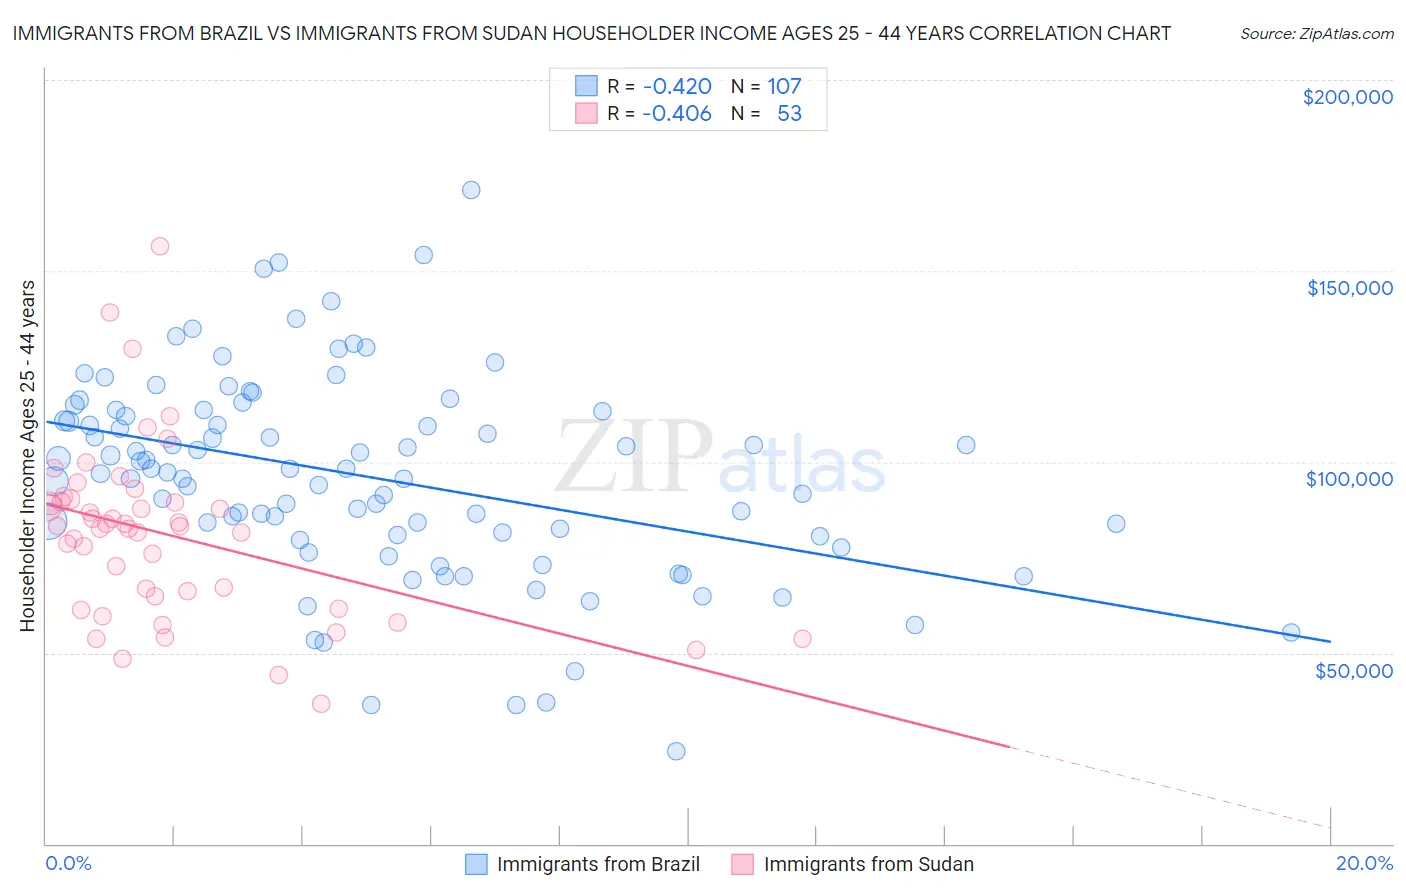 Immigrants from Brazil vs Immigrants from Sudan Householder Income Ages 25 - 44 years